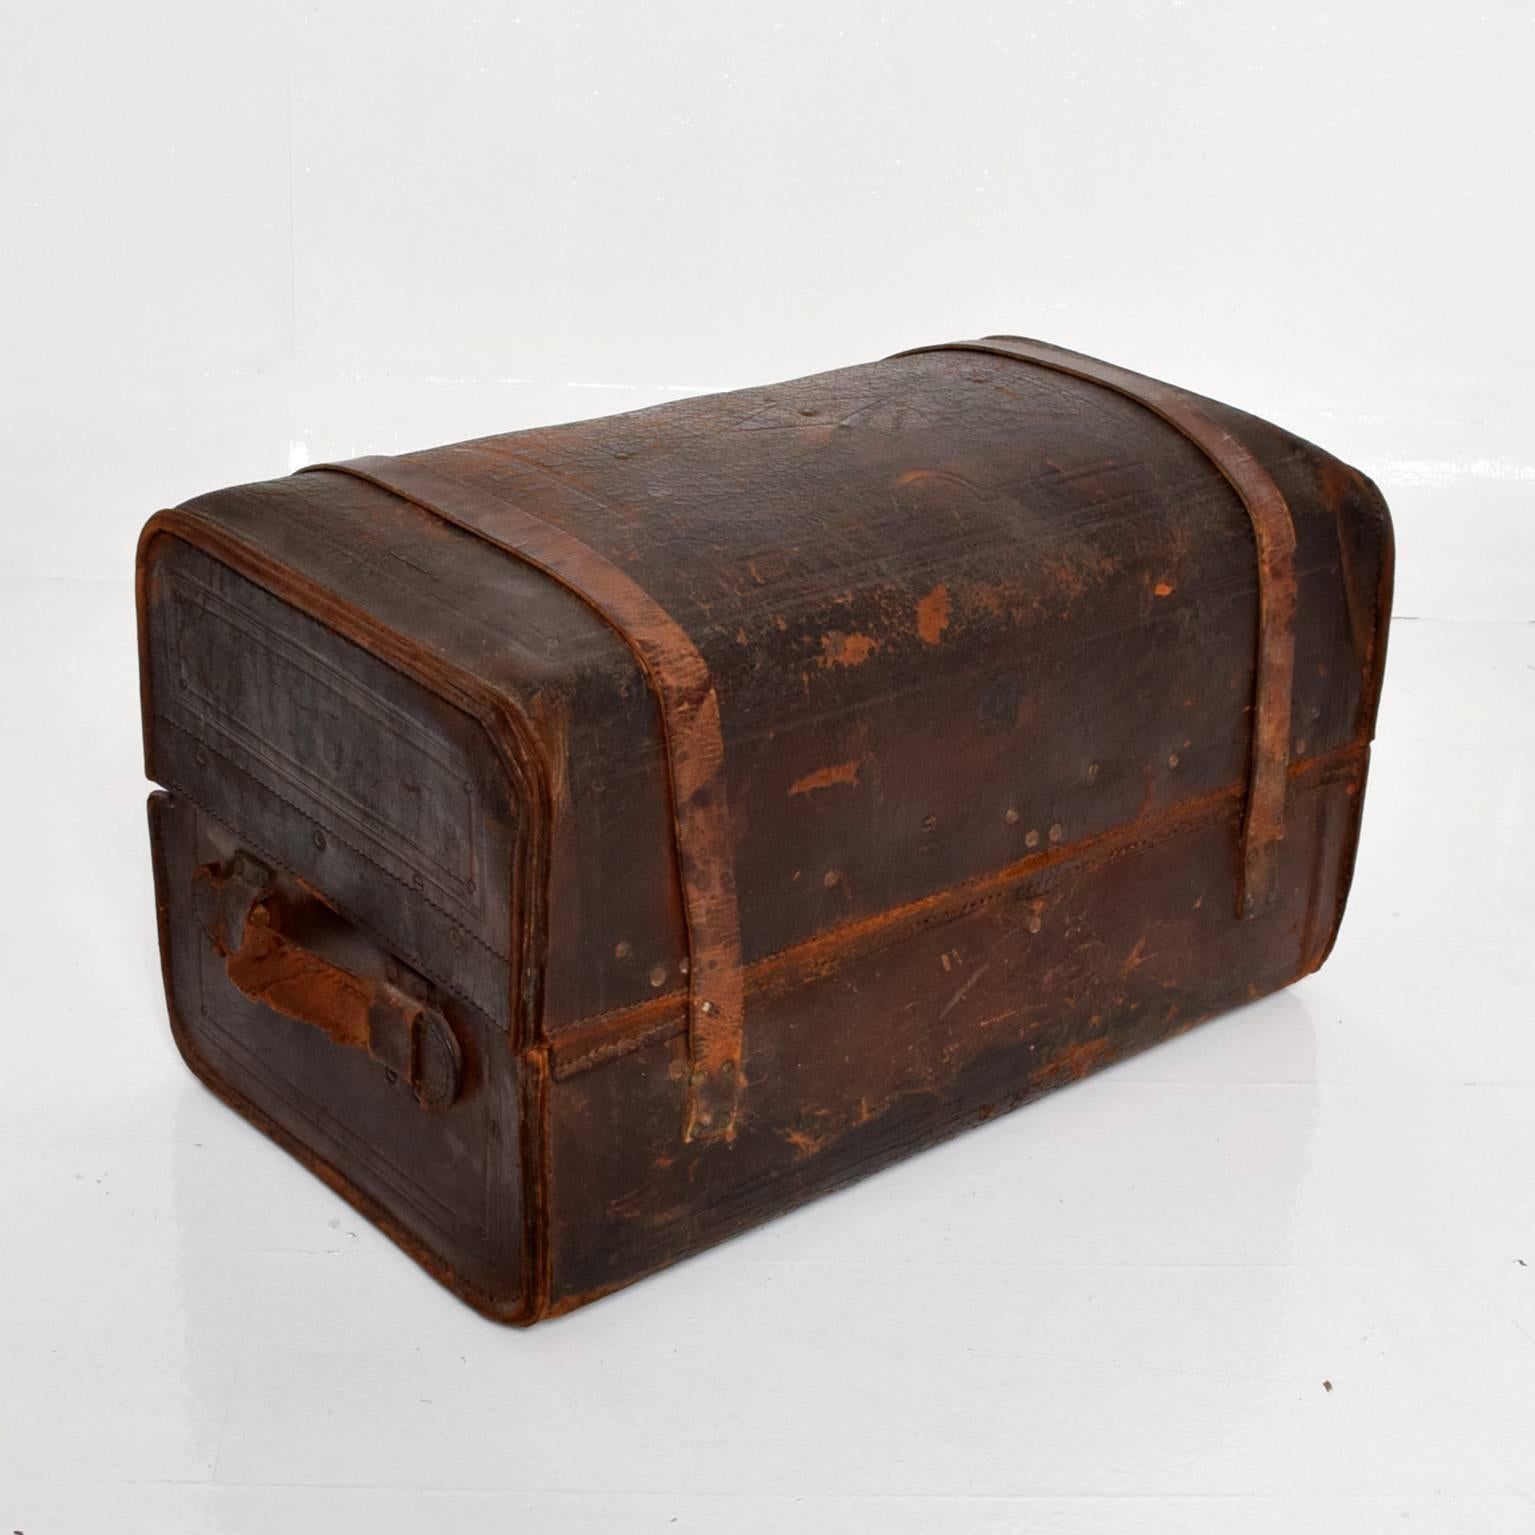 American Antique Travel Leather Trunk Suitcase